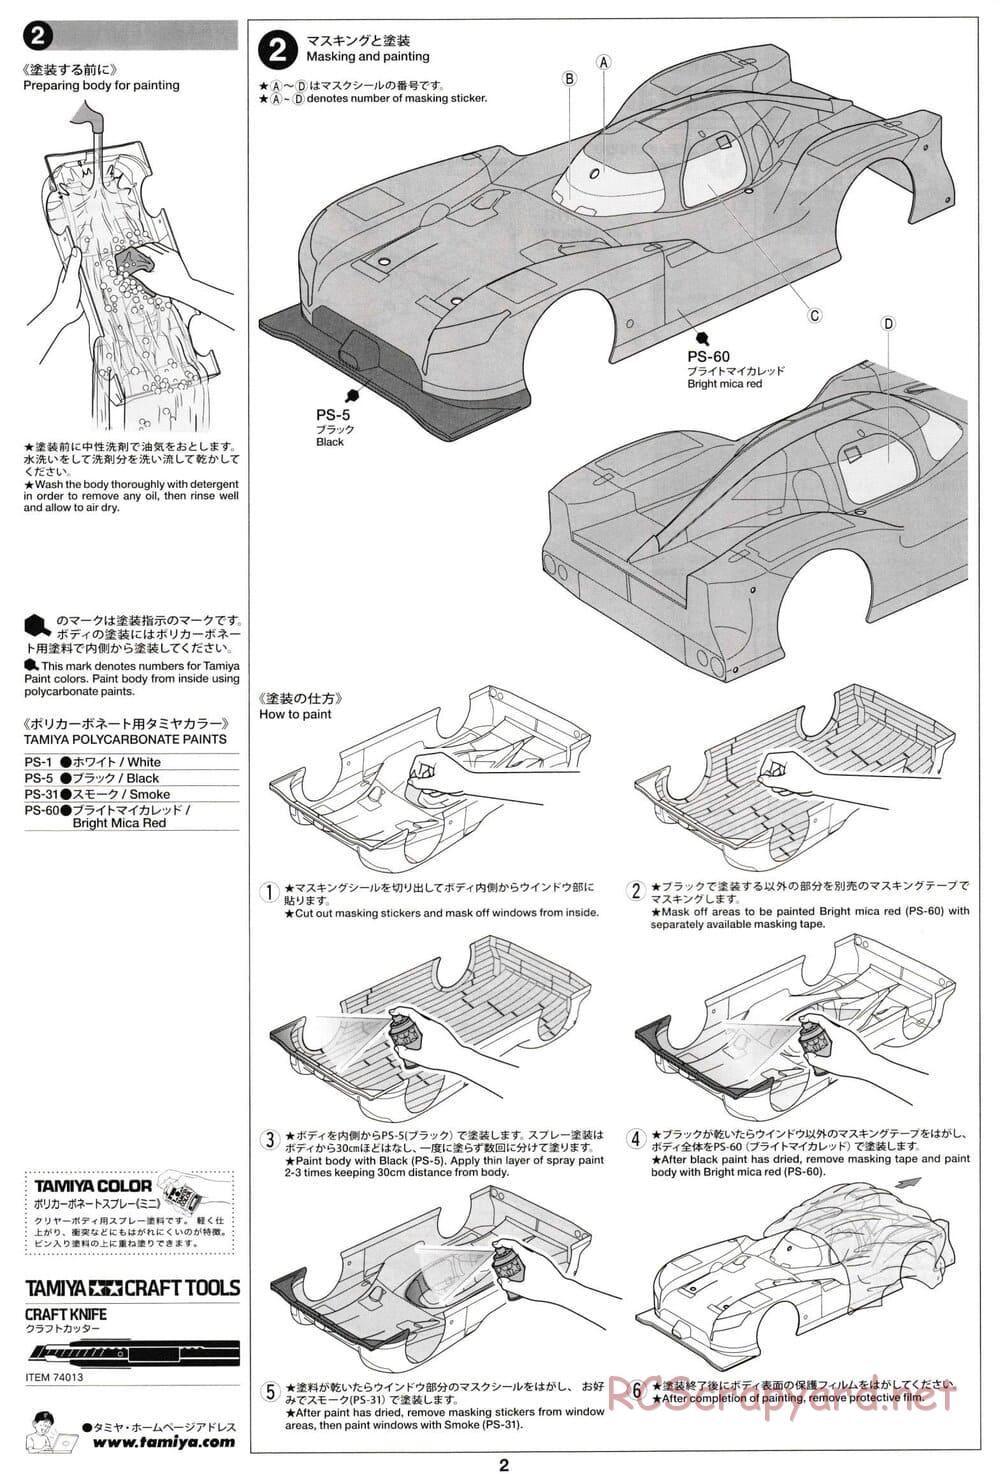 Tamiya - Nissan GT-R LM Nismo Launch Version - F103GT Chassis - Body Manual - Page 2